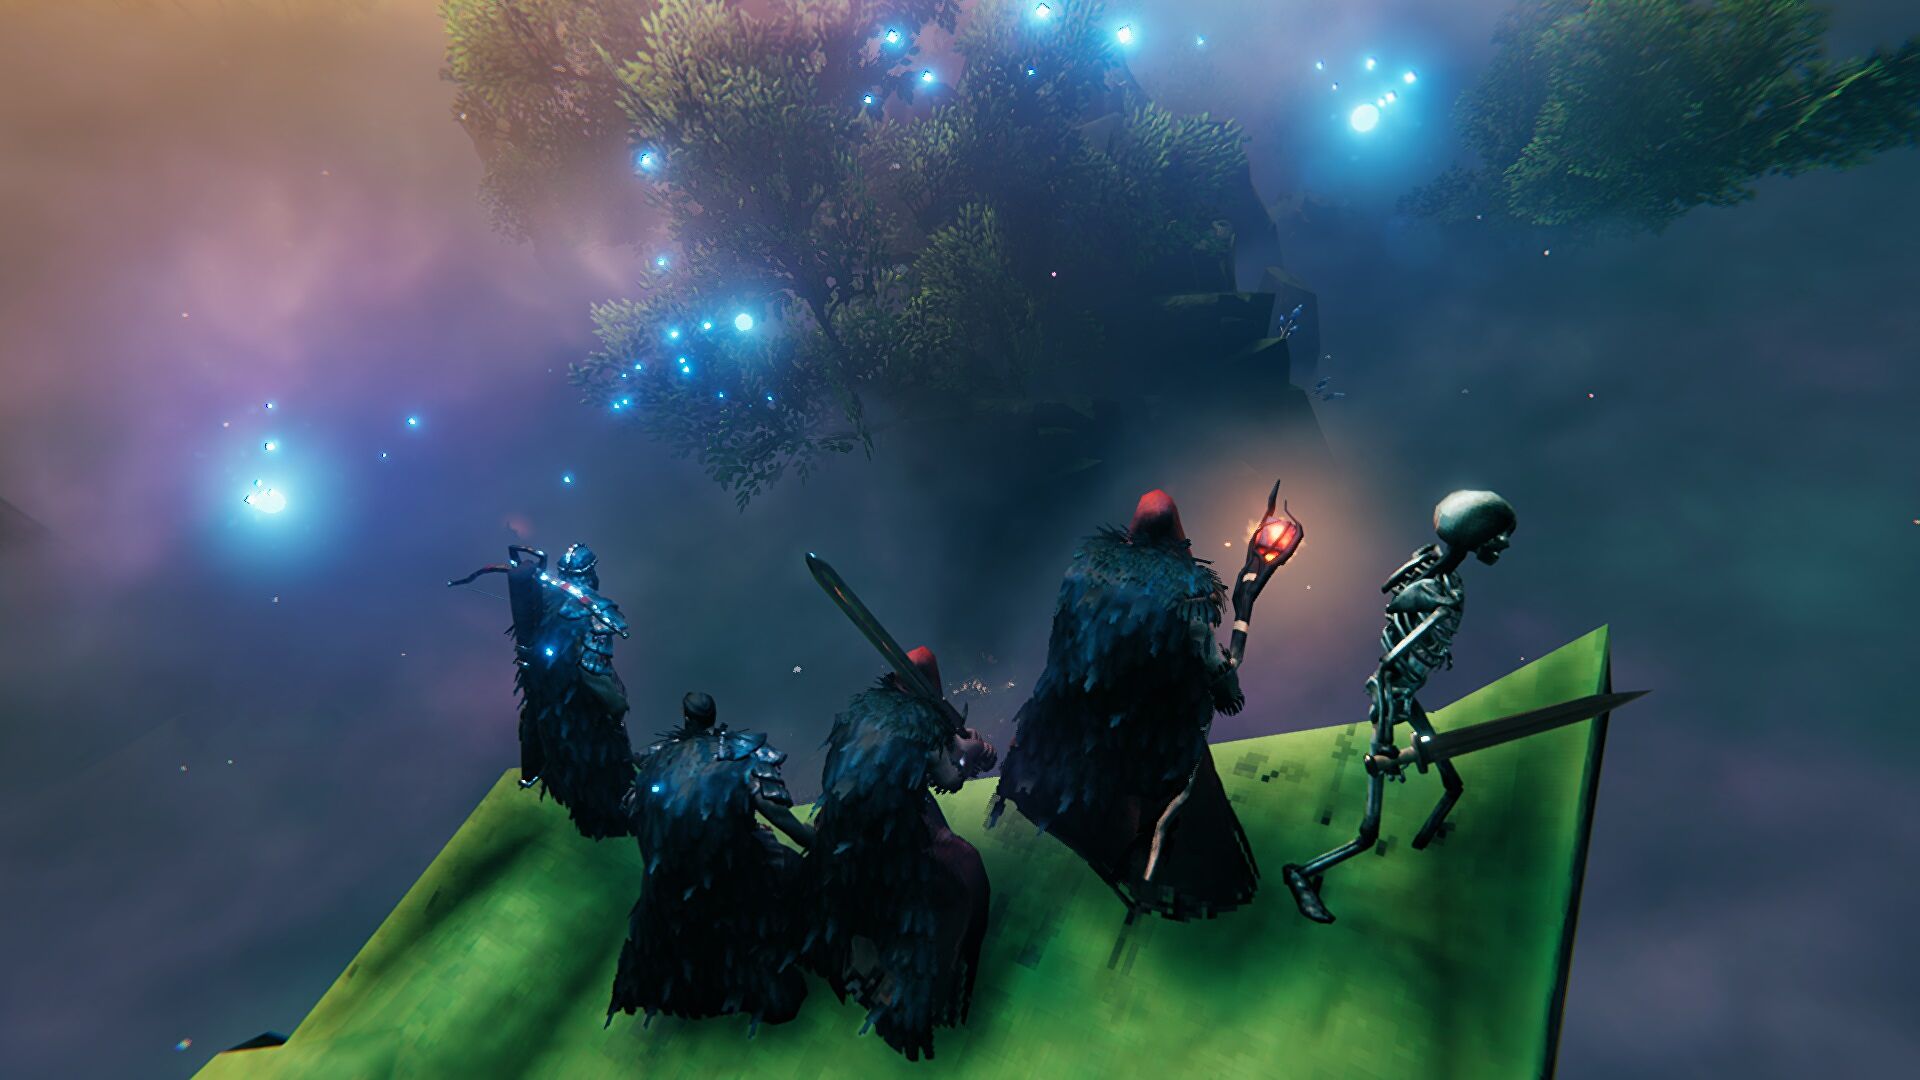 Valheim Mistlands Preview: A truly magical update packed with fresh ideas